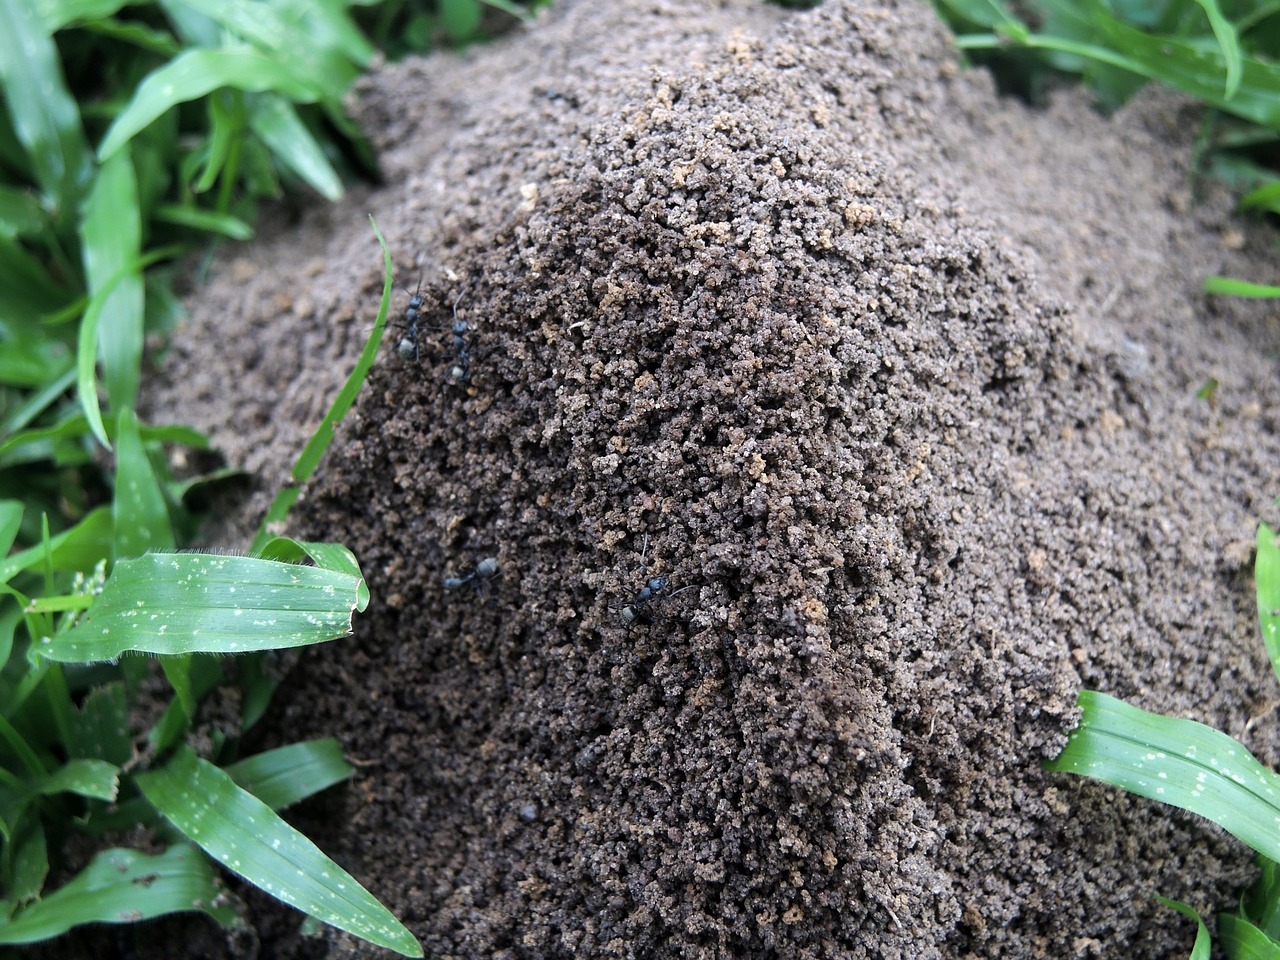 How To Get Rid Of Fire Ants From Your Lawn Or Garden